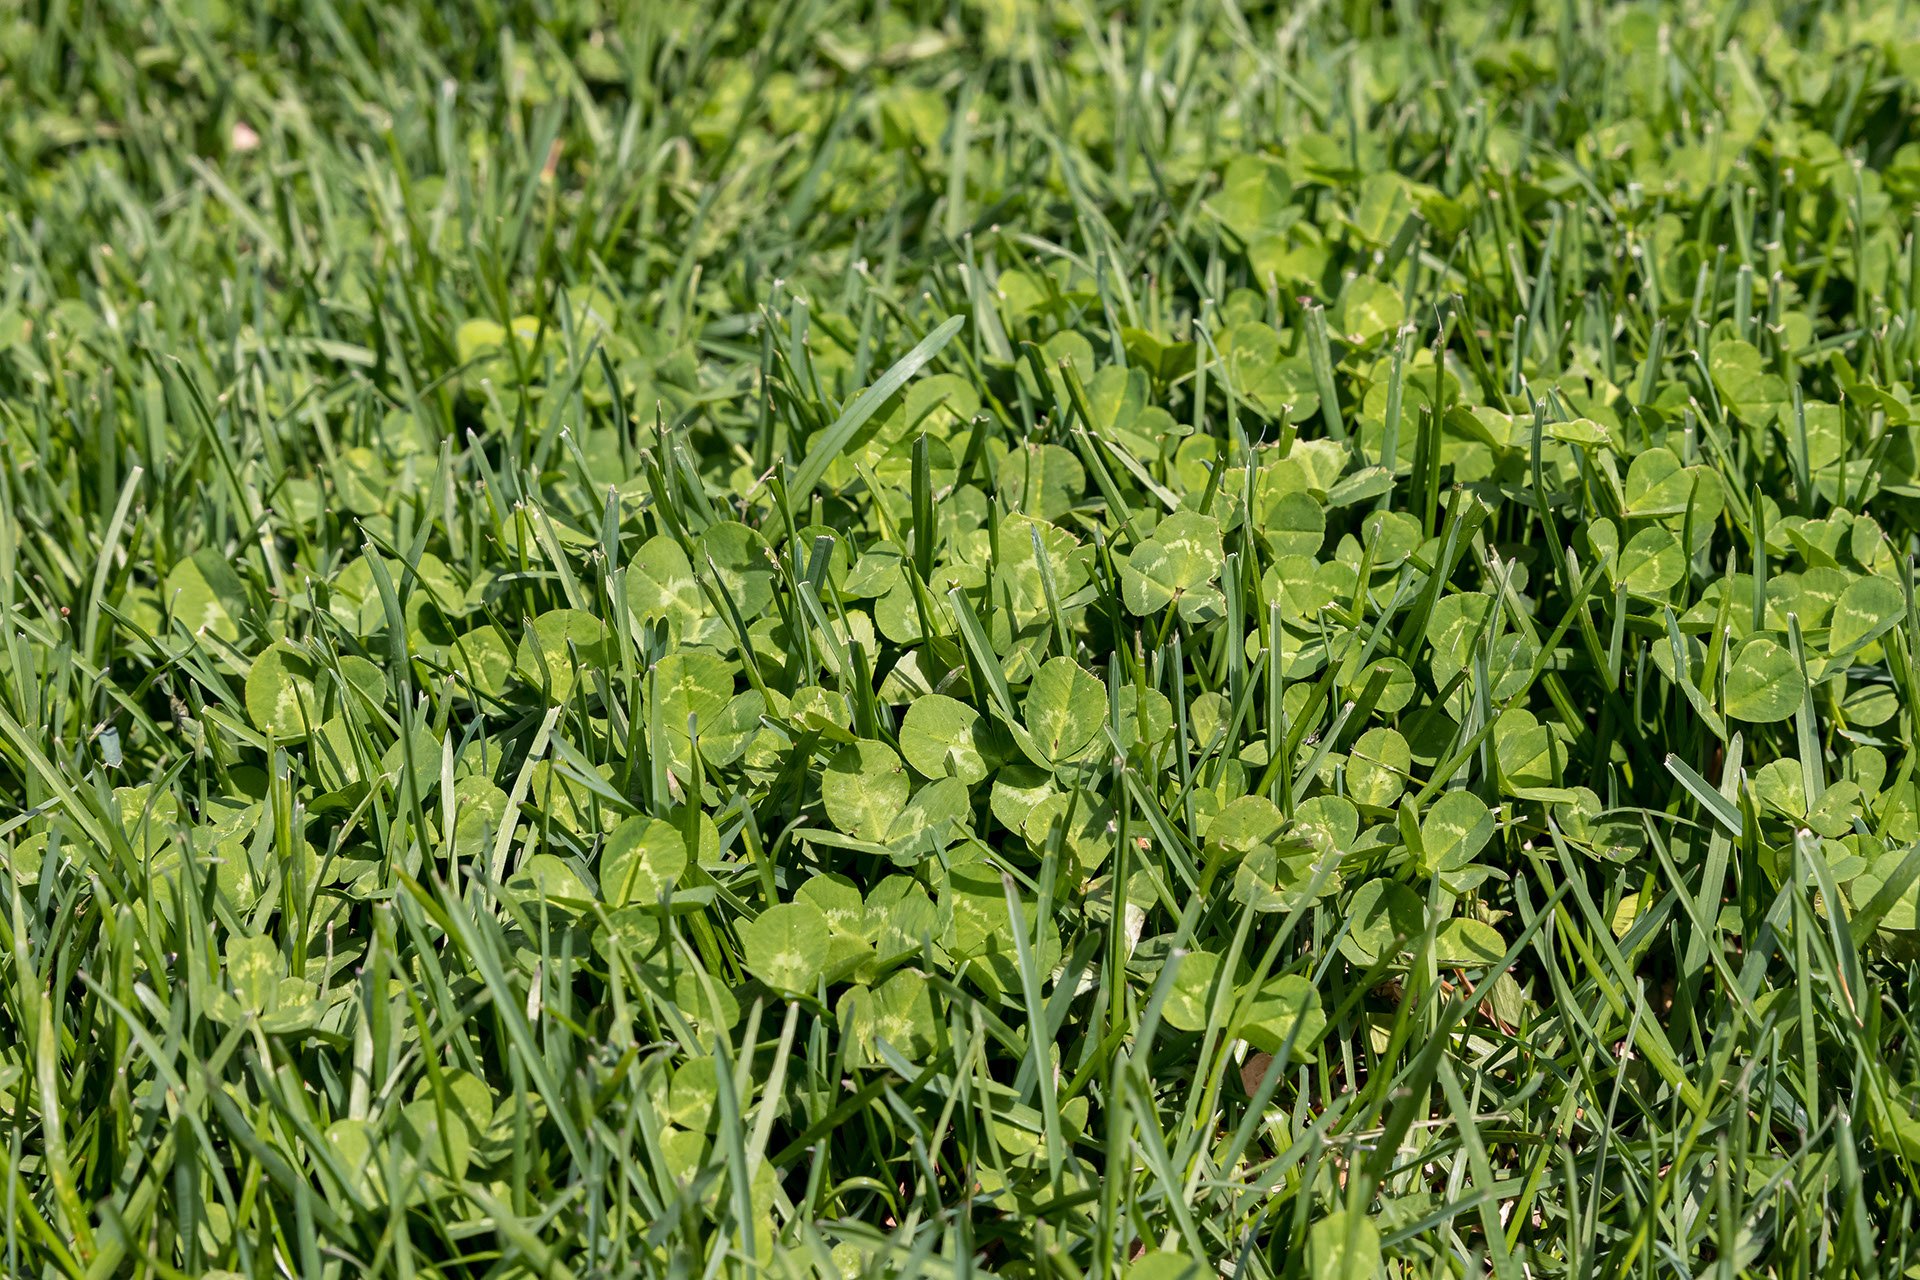 How to Get Rid of Clover: 4 Natural Methods